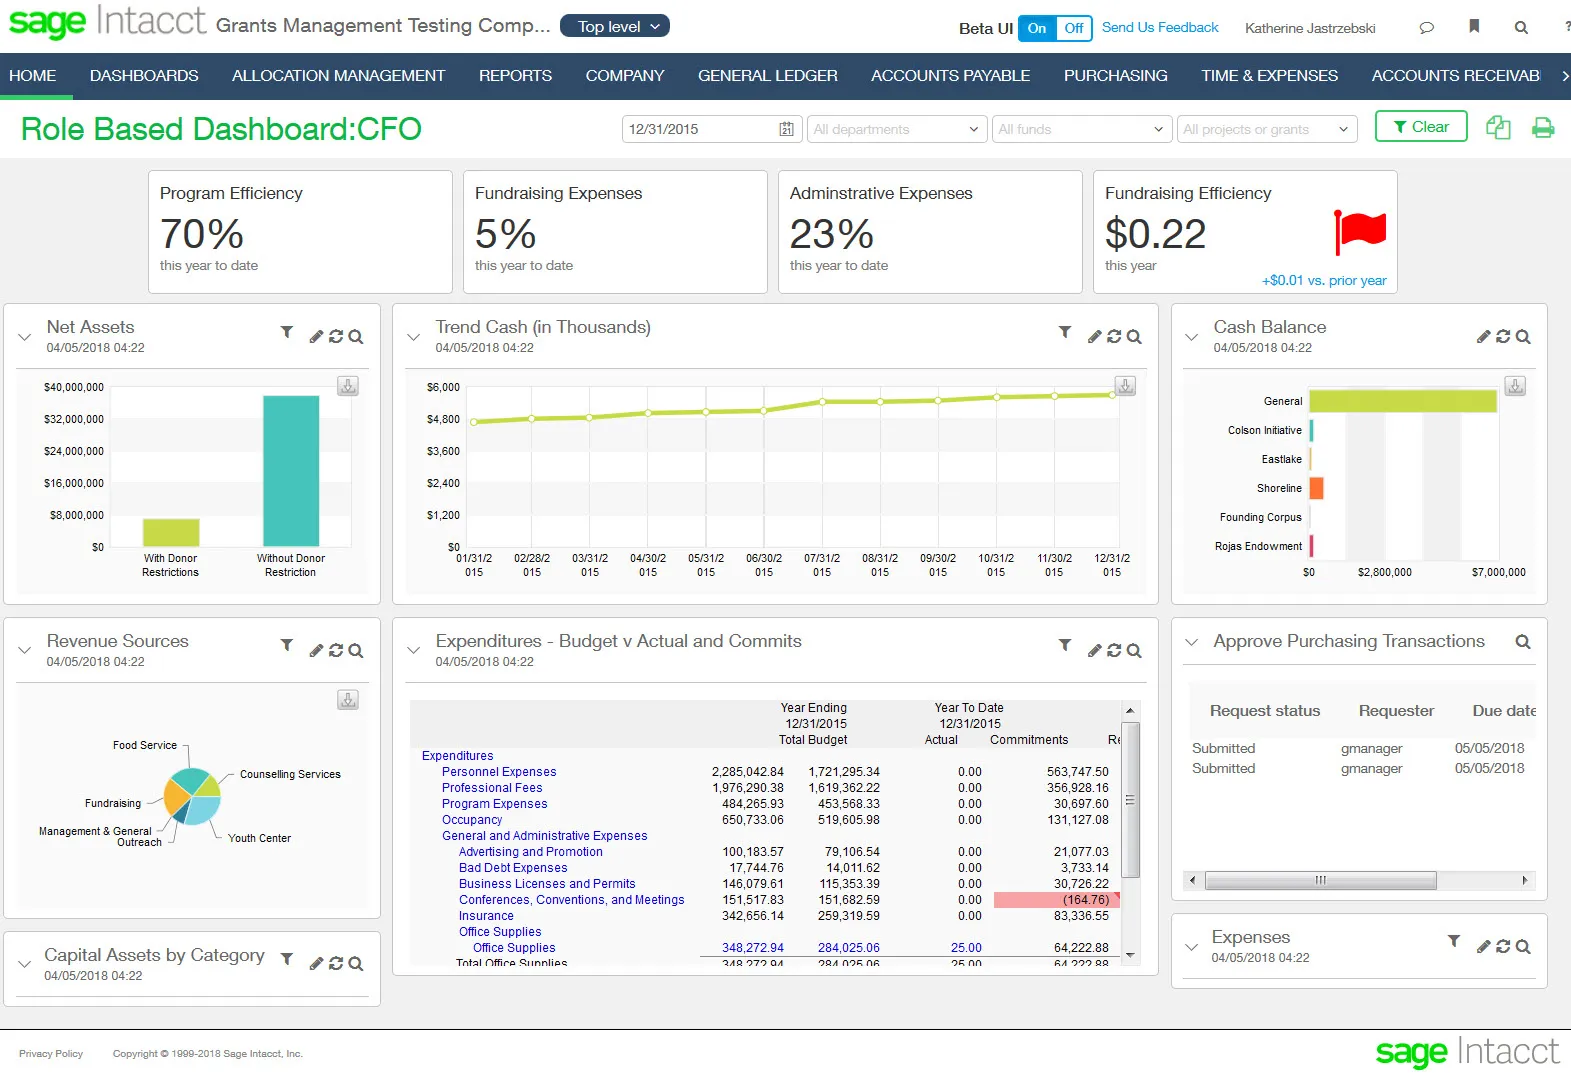 Sage Intacct not for profit dashboard